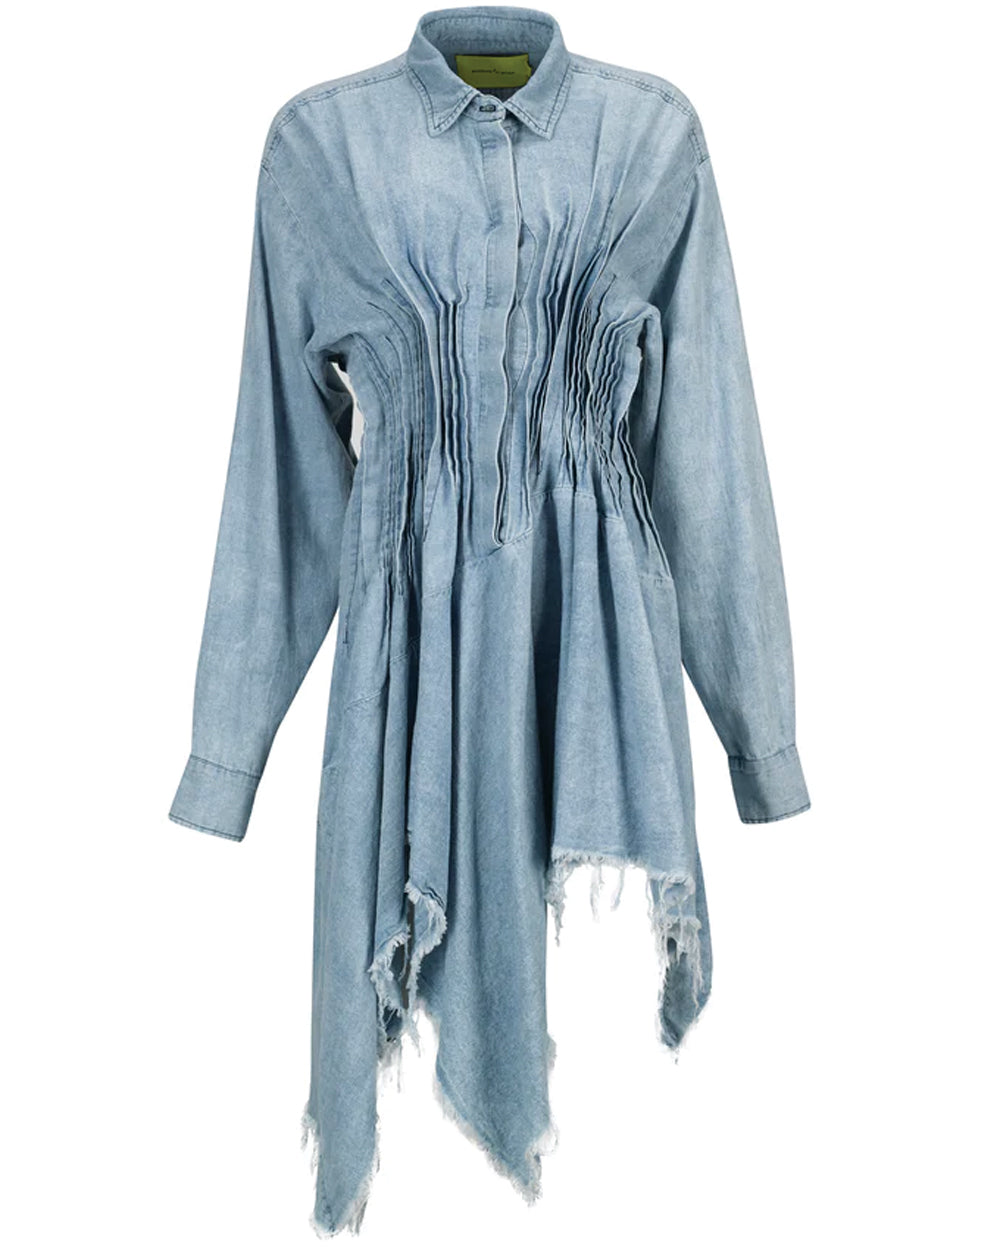 Pleated Chambray Shirt Dress in Light Blue